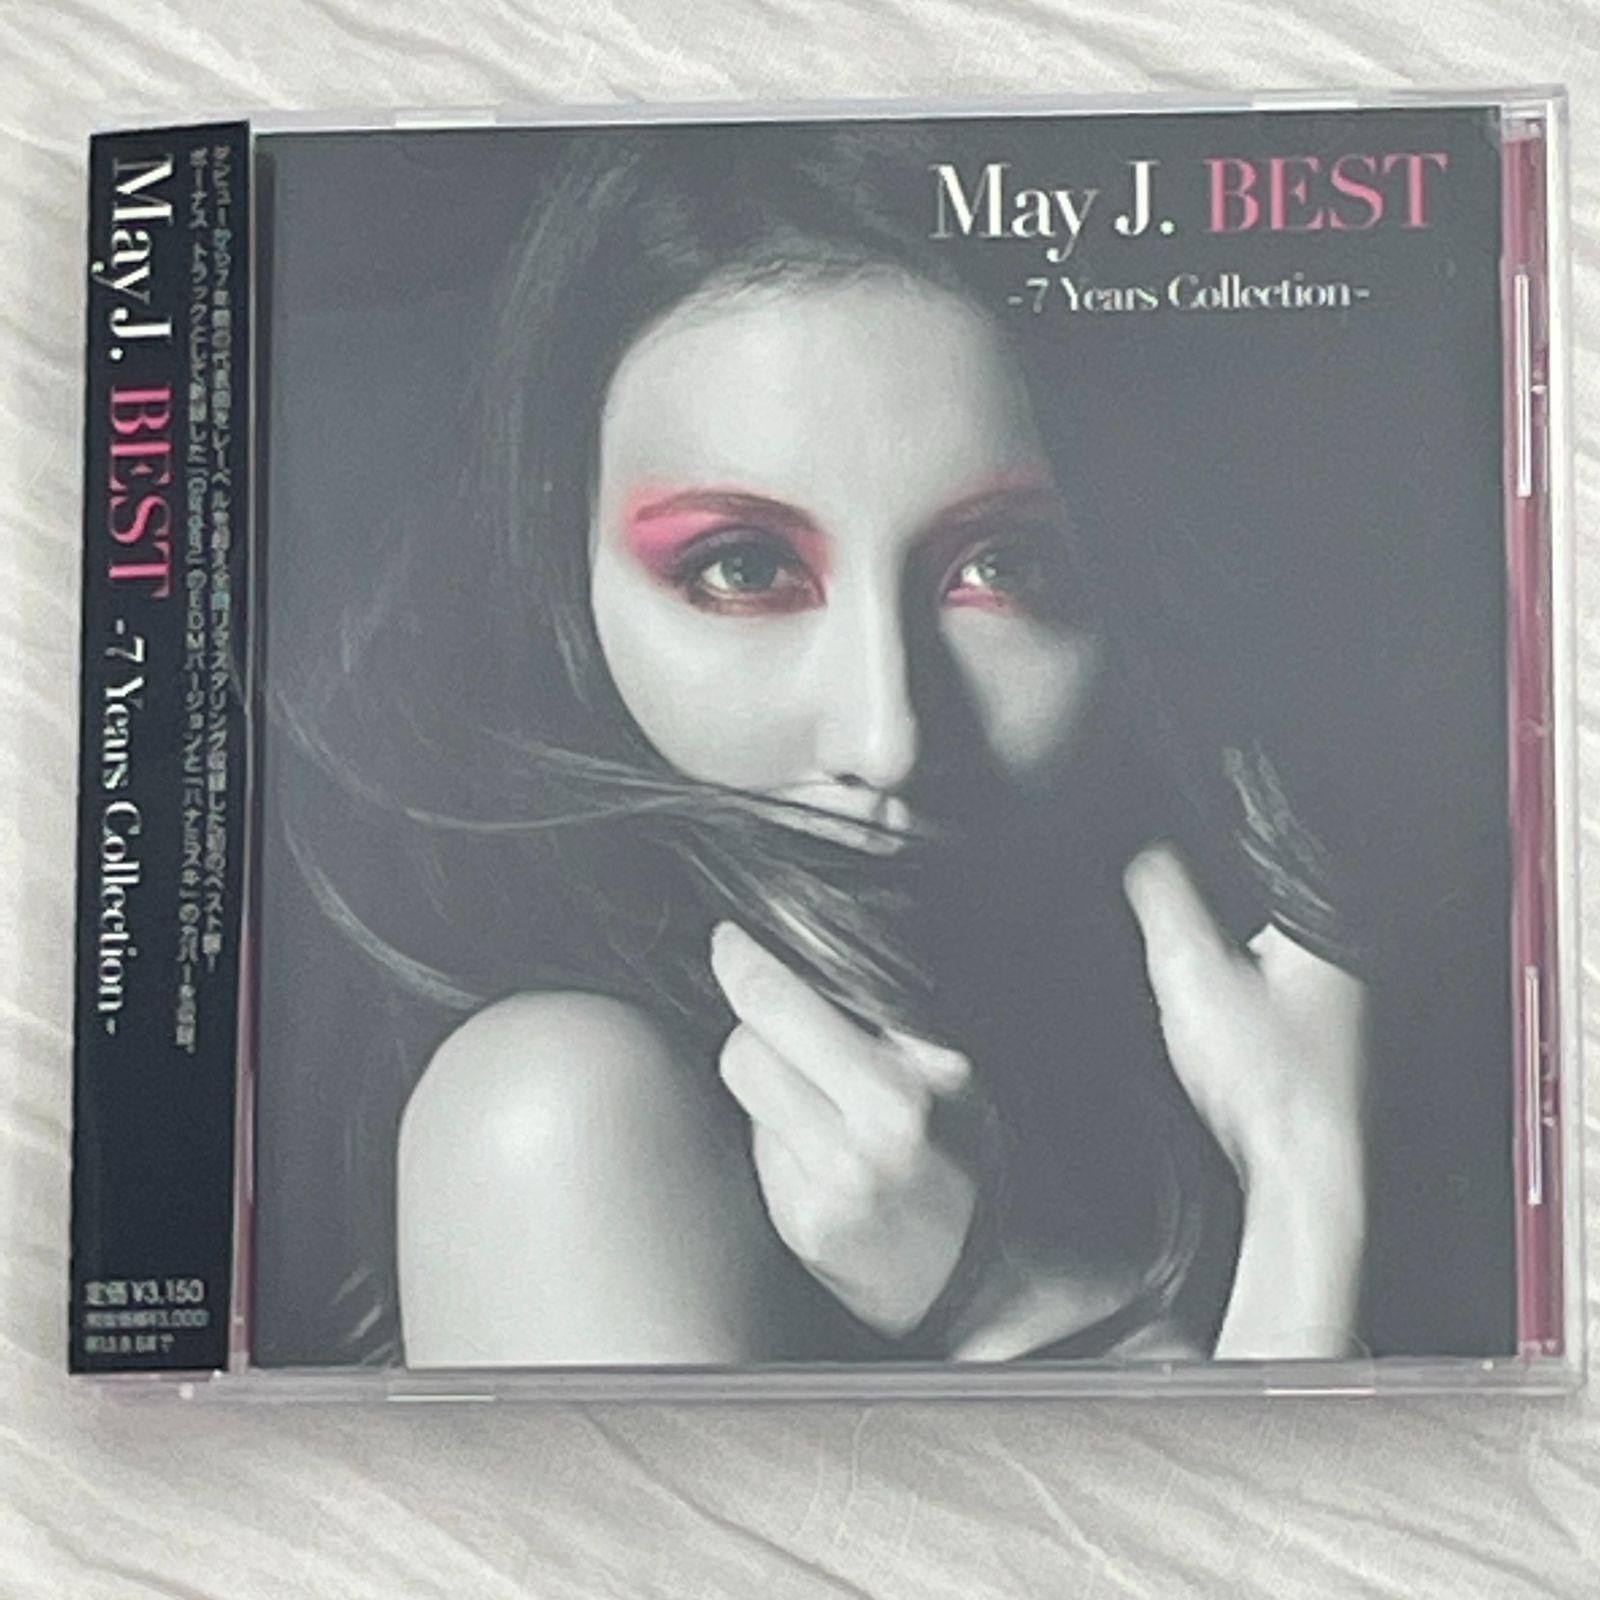 May J.｜BEST - 7 Years Collection-（中古CD）